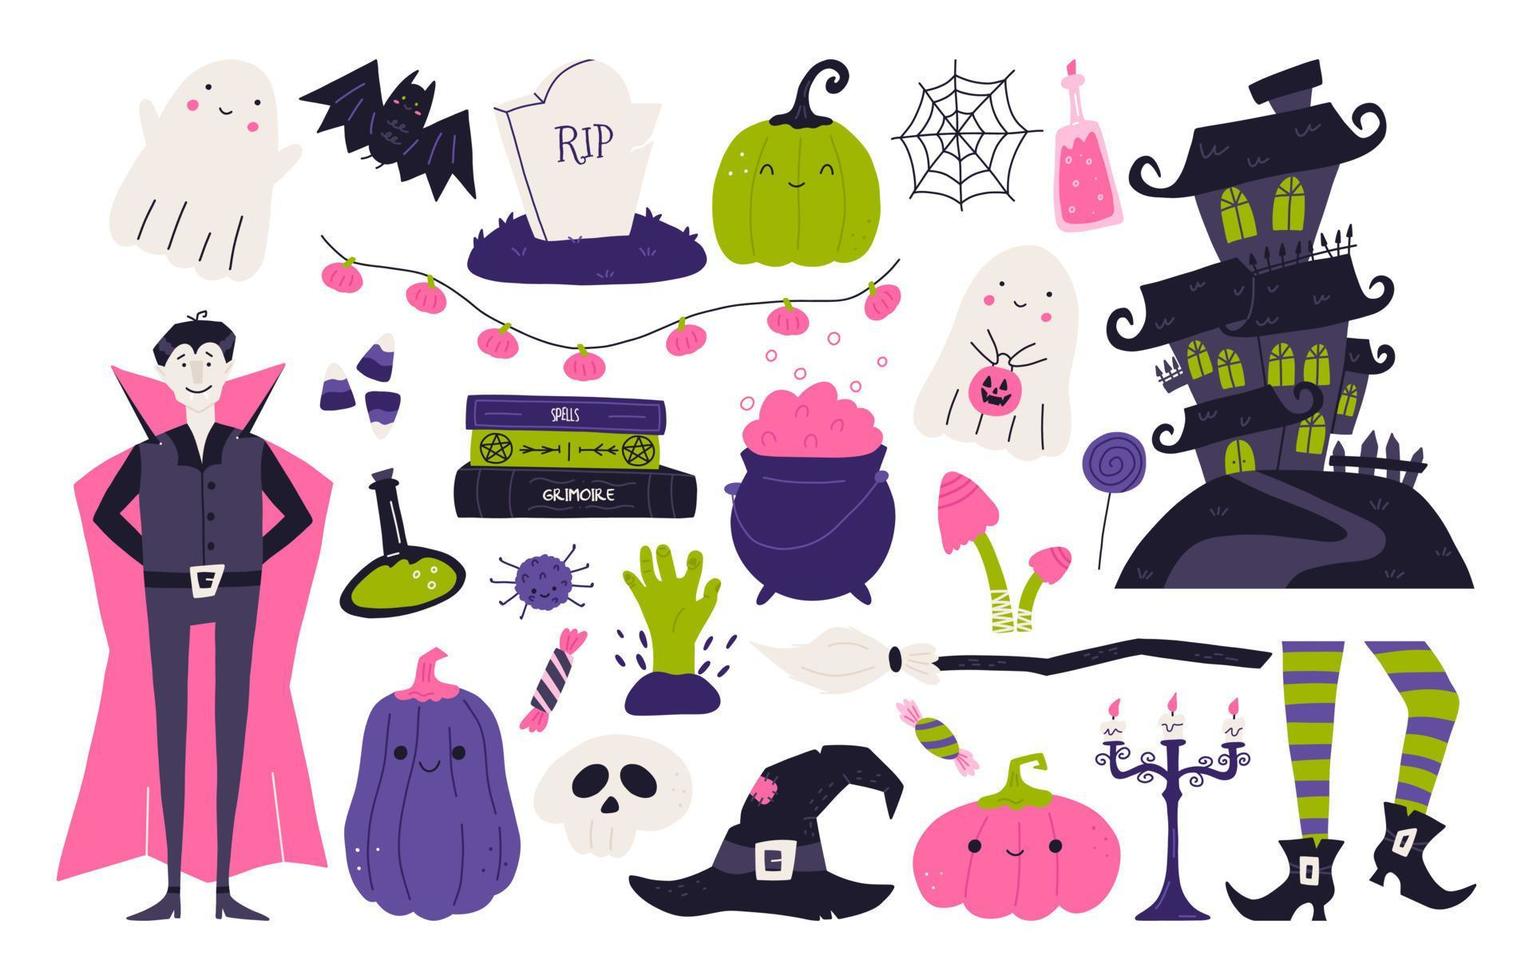 Set of cute Halloween elements, cartoon flat vector illustration isolated on white background. Funny spooky characters - vampire, ghosts, pumpkin, spider. Haunted house, witch broom and hat.